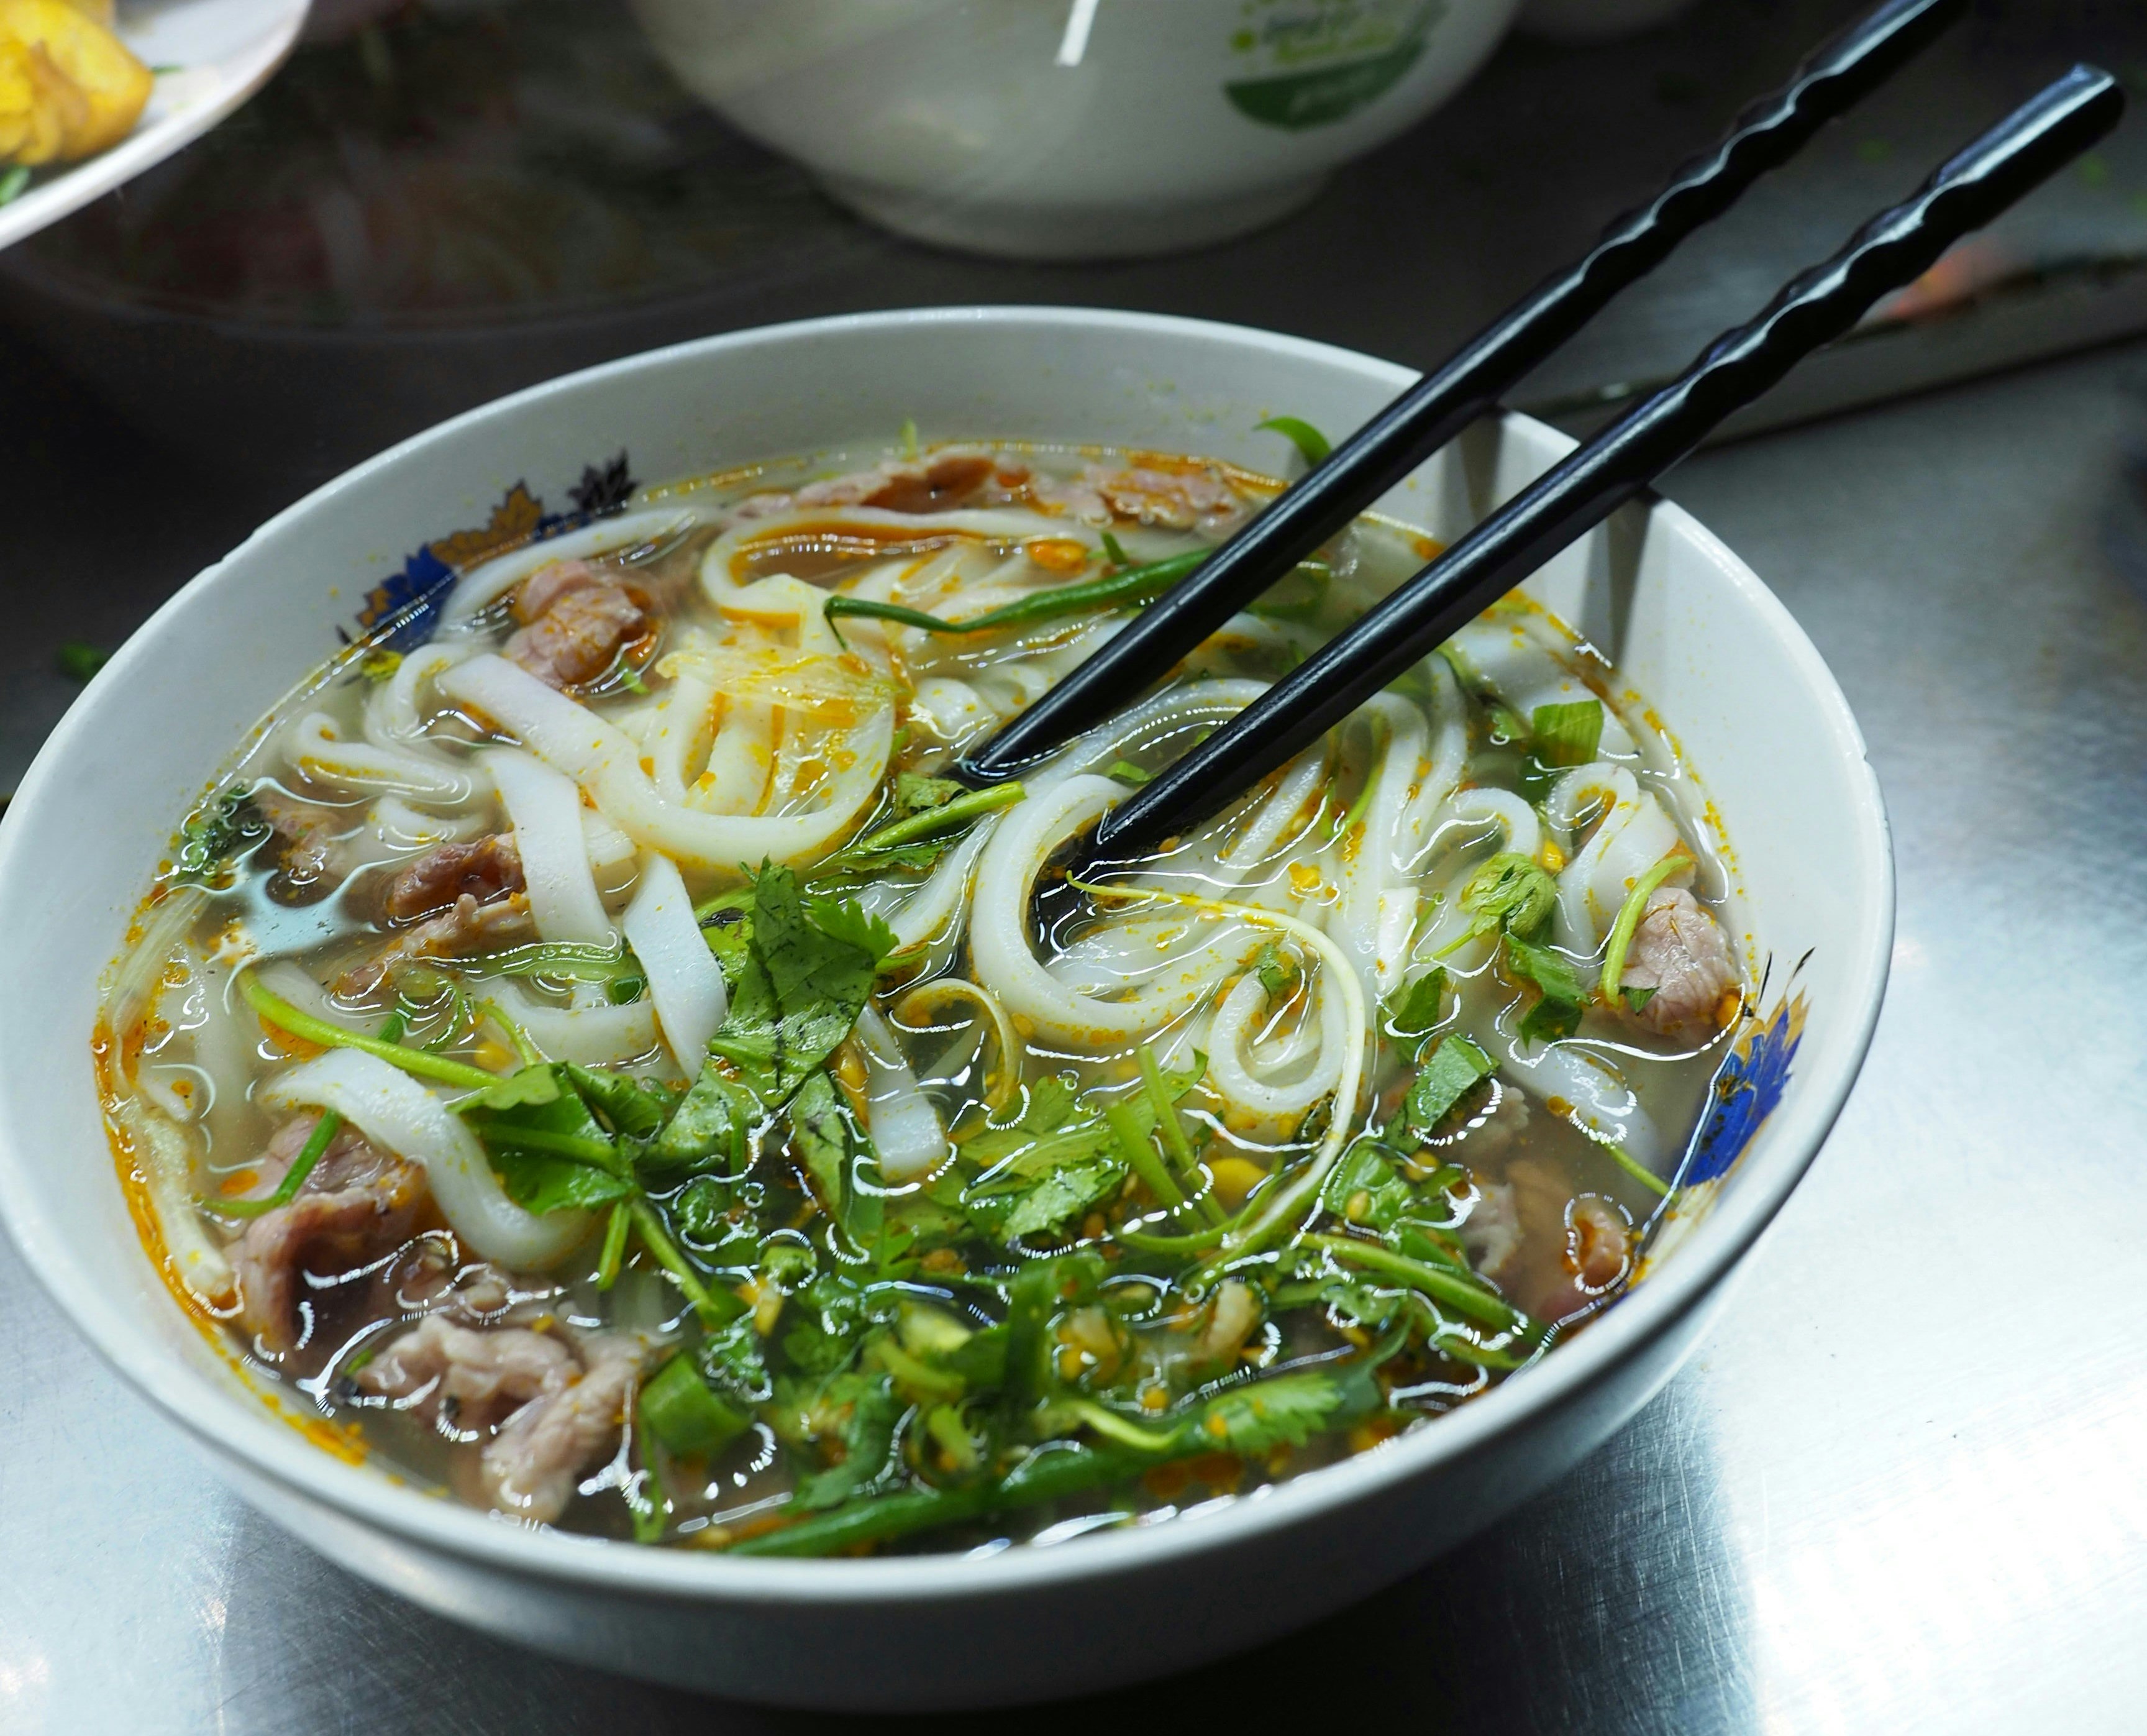 A side-on view of a bowl of pho stood on a tabletop in a Vietnamese restaurant. The pho contains thick noodles, veg and meat, and has a pair of chopsticks resting in it.